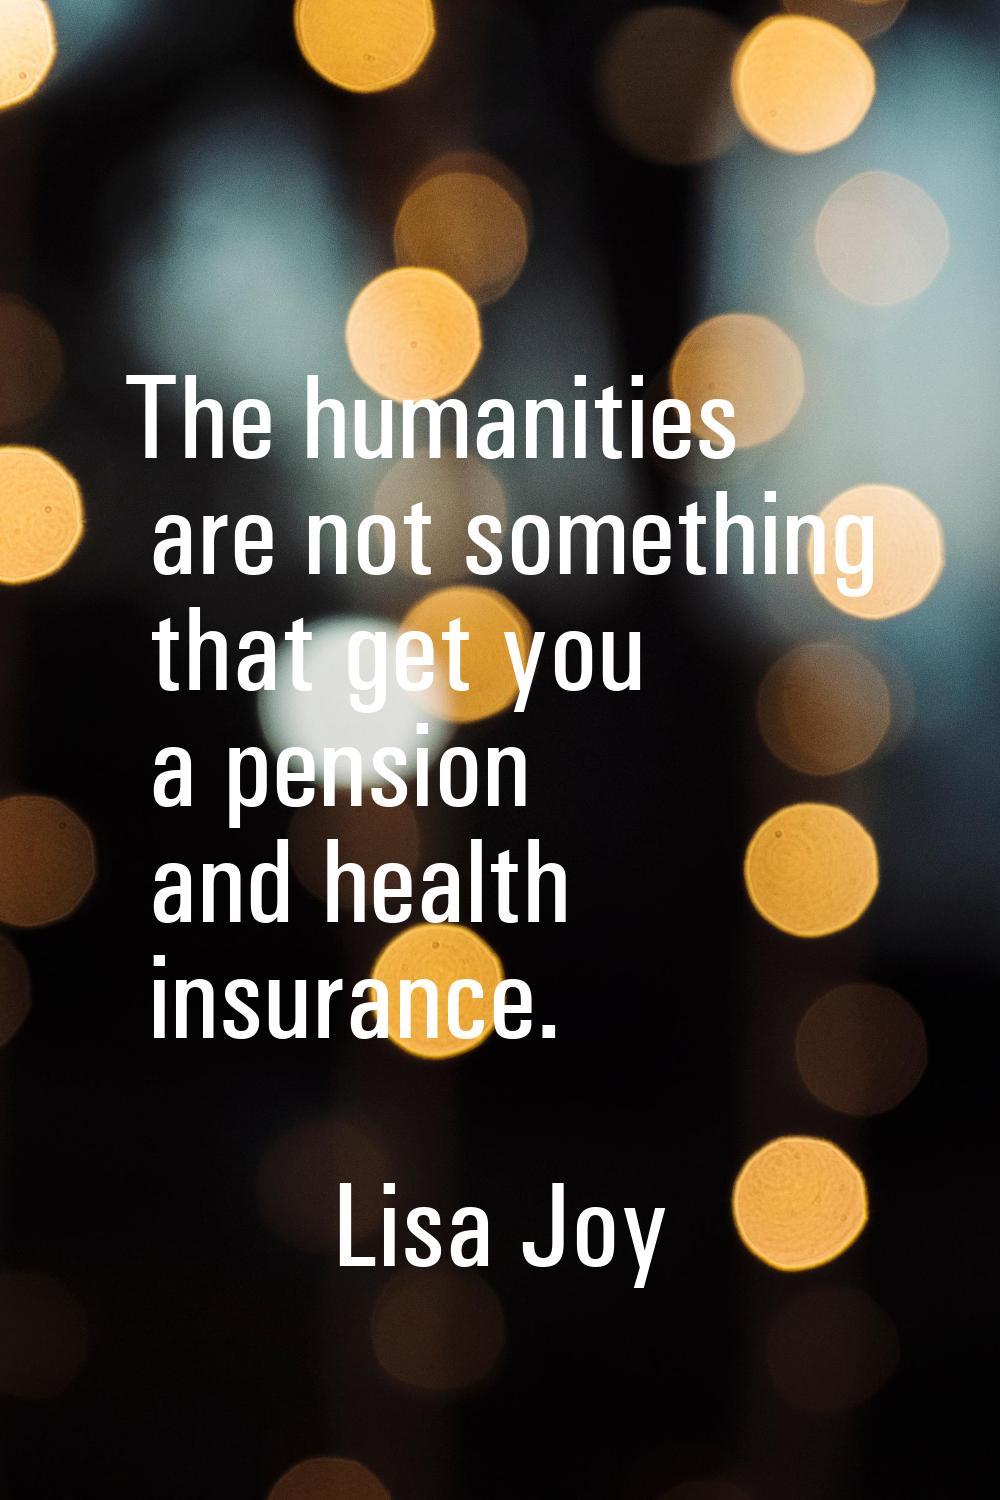 The humanities are not something that get you a pension and health insurance.